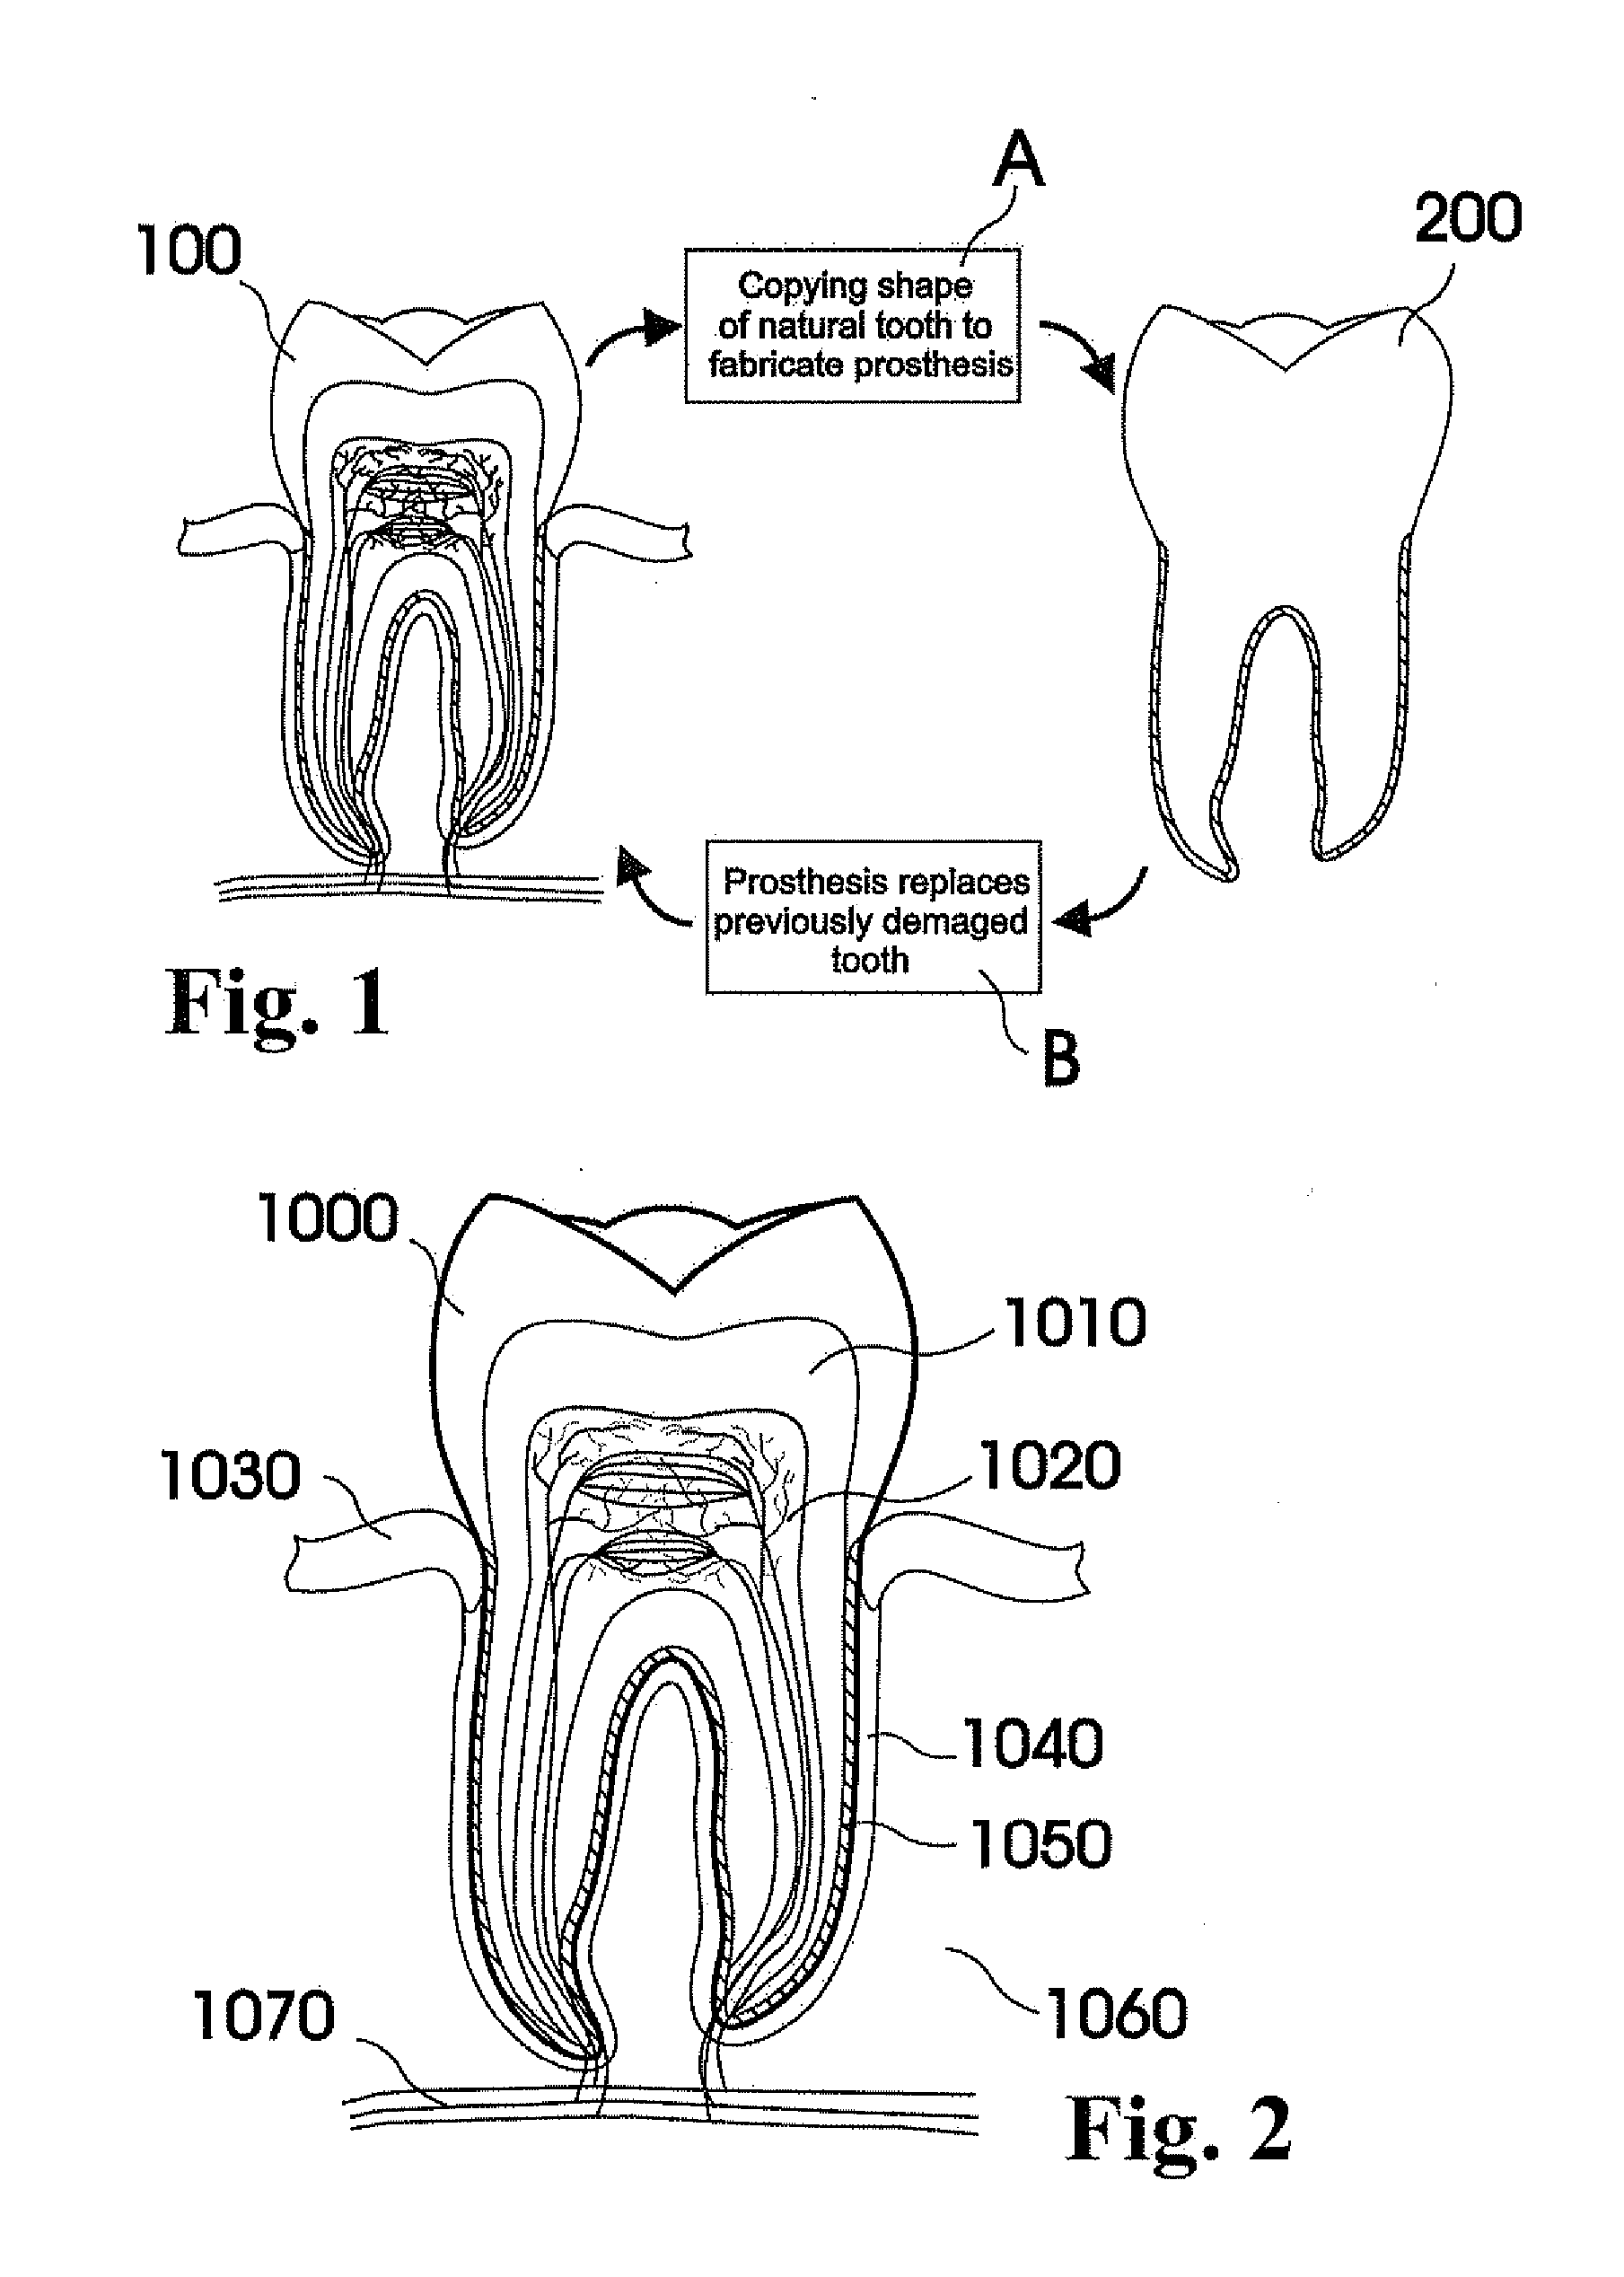 Methods of Designing and Manufacturing Customized Dental Prosthesis for Periodontal or Osseointegration and Related Systems